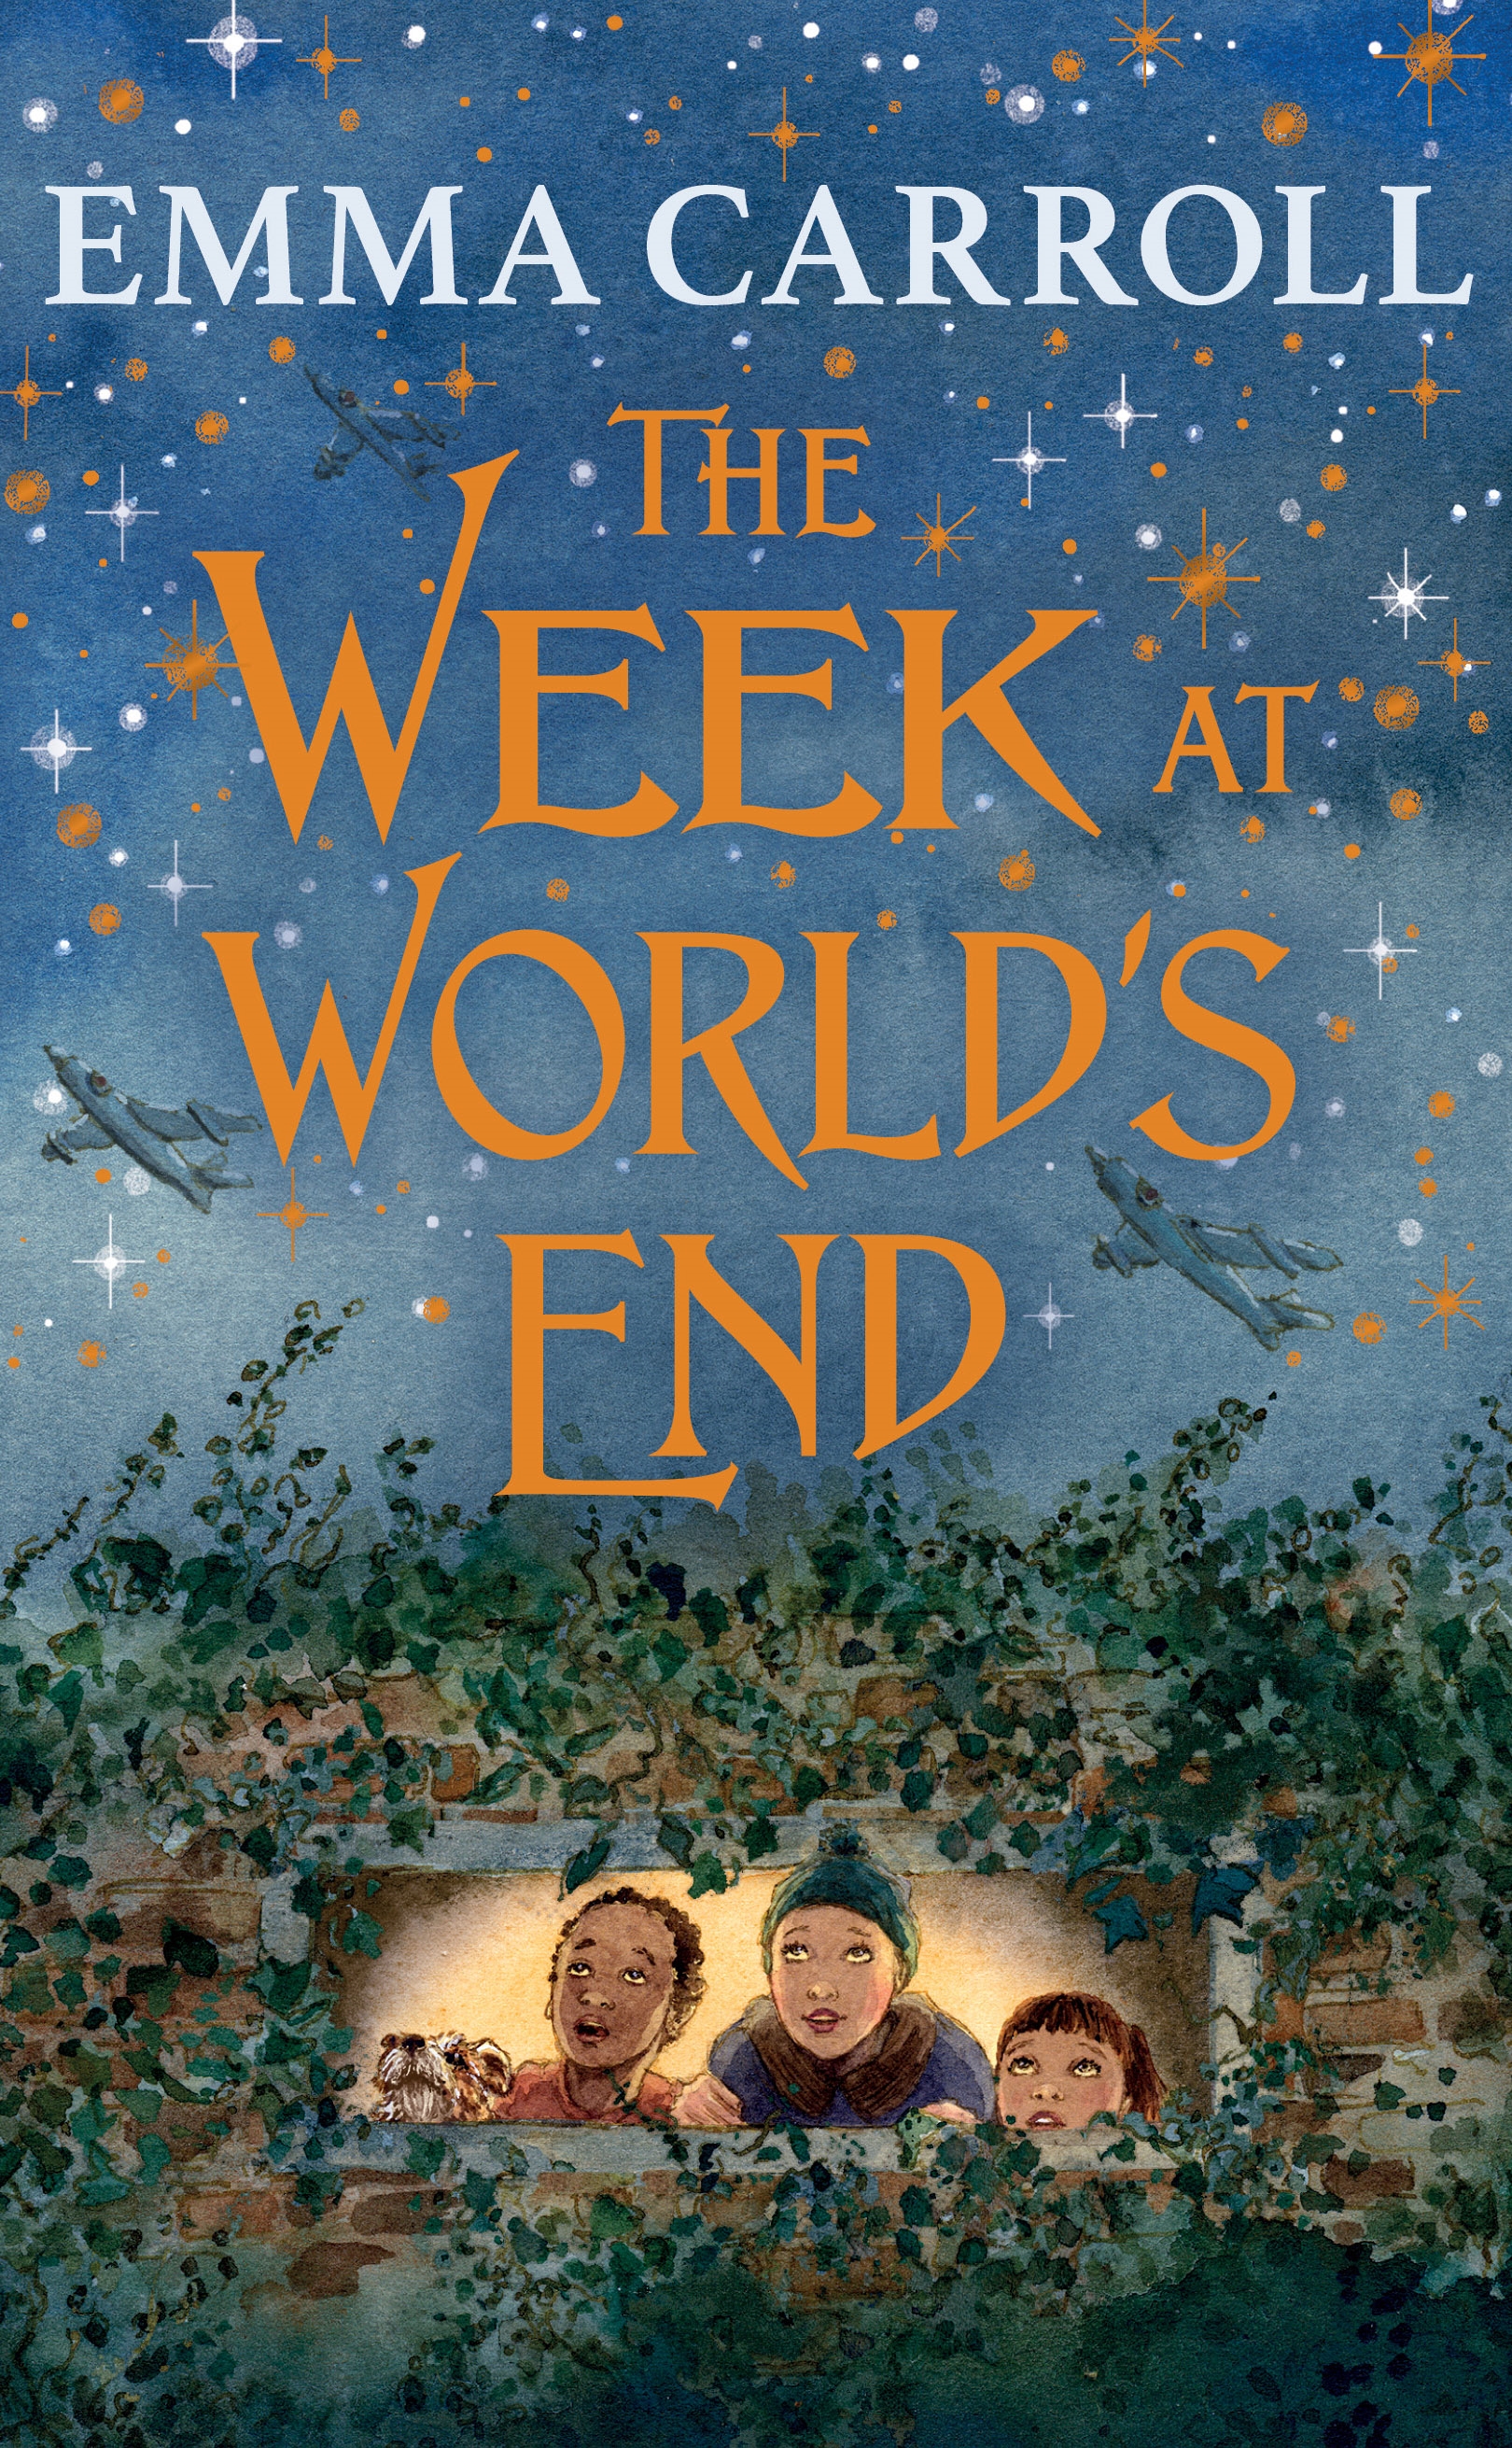 The Week at Worlds End book cover image